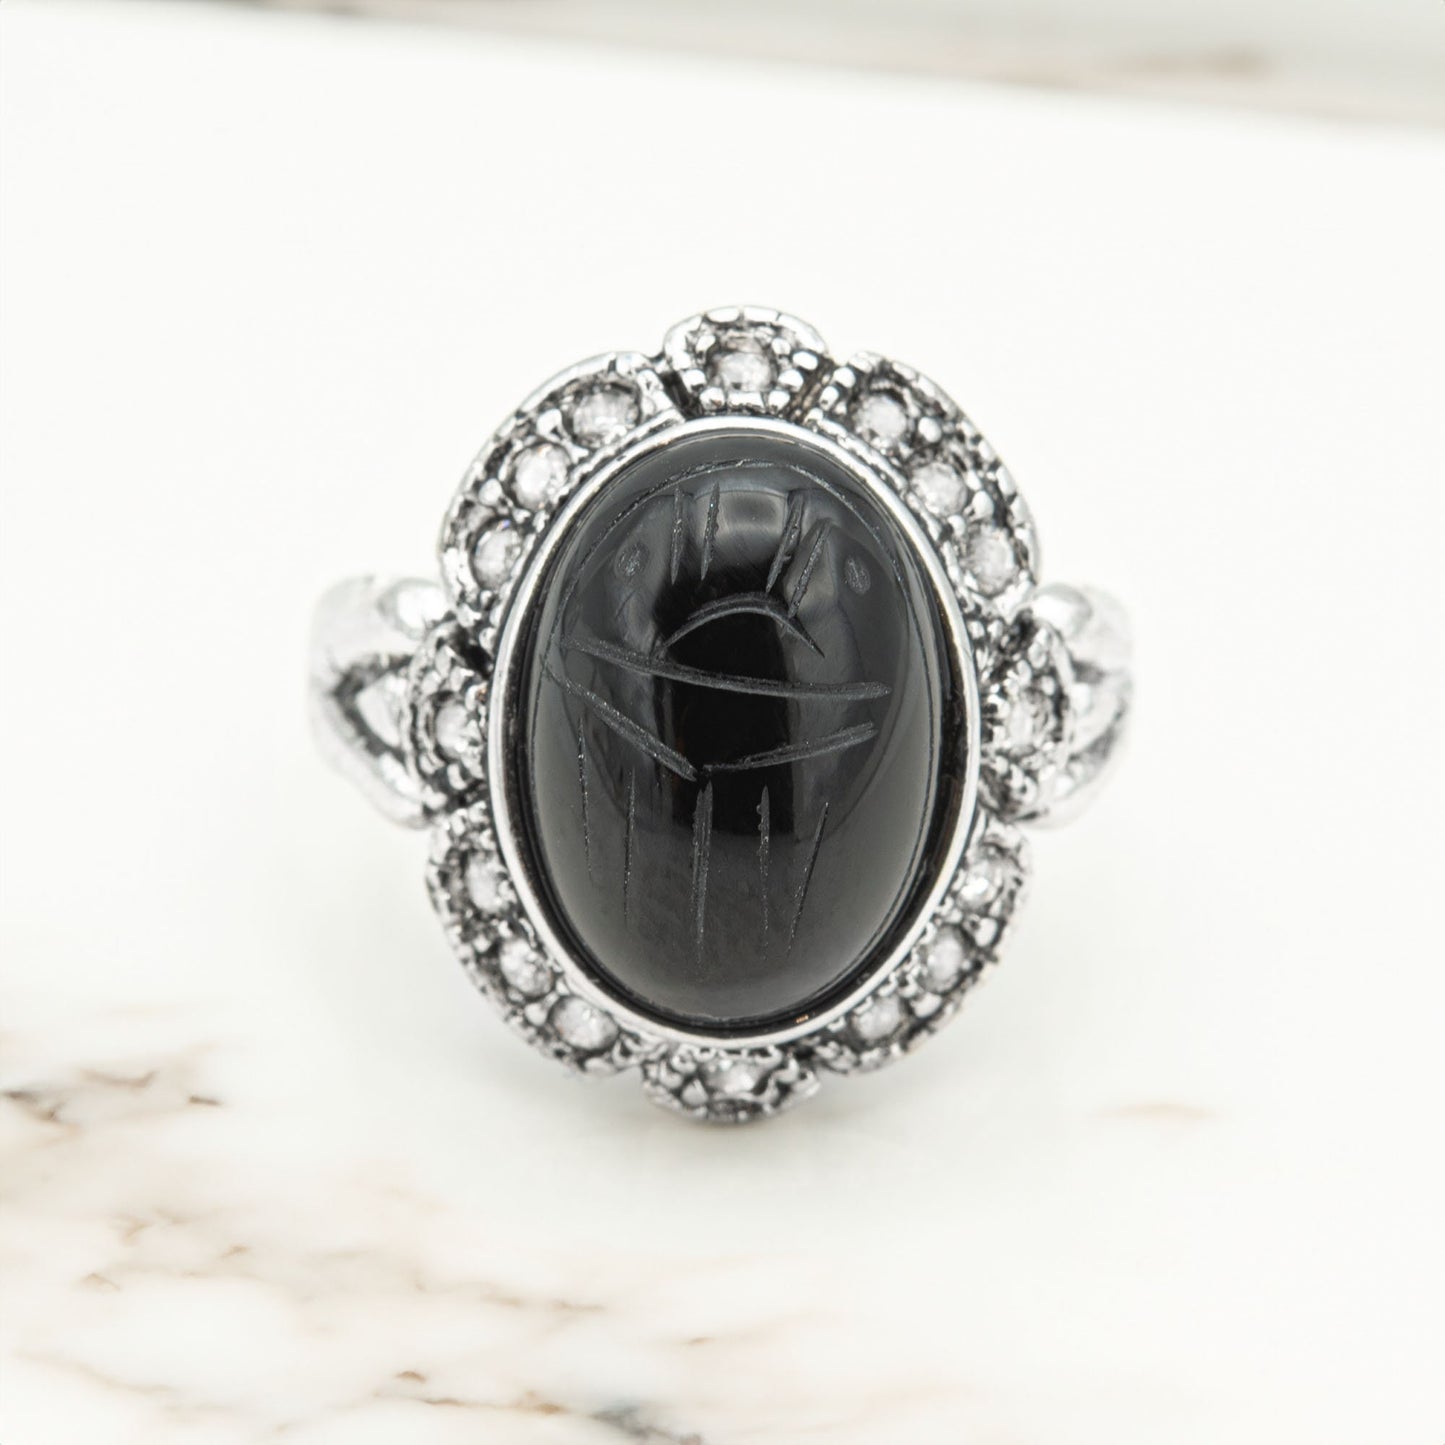 Genuine Black Onyx Scarab or Moonstone Ring Vintage 1970s 18k White Gold Antique Plated Clear Austrian Crystals Woman's Handmade Jewelry #R1730-BSCY